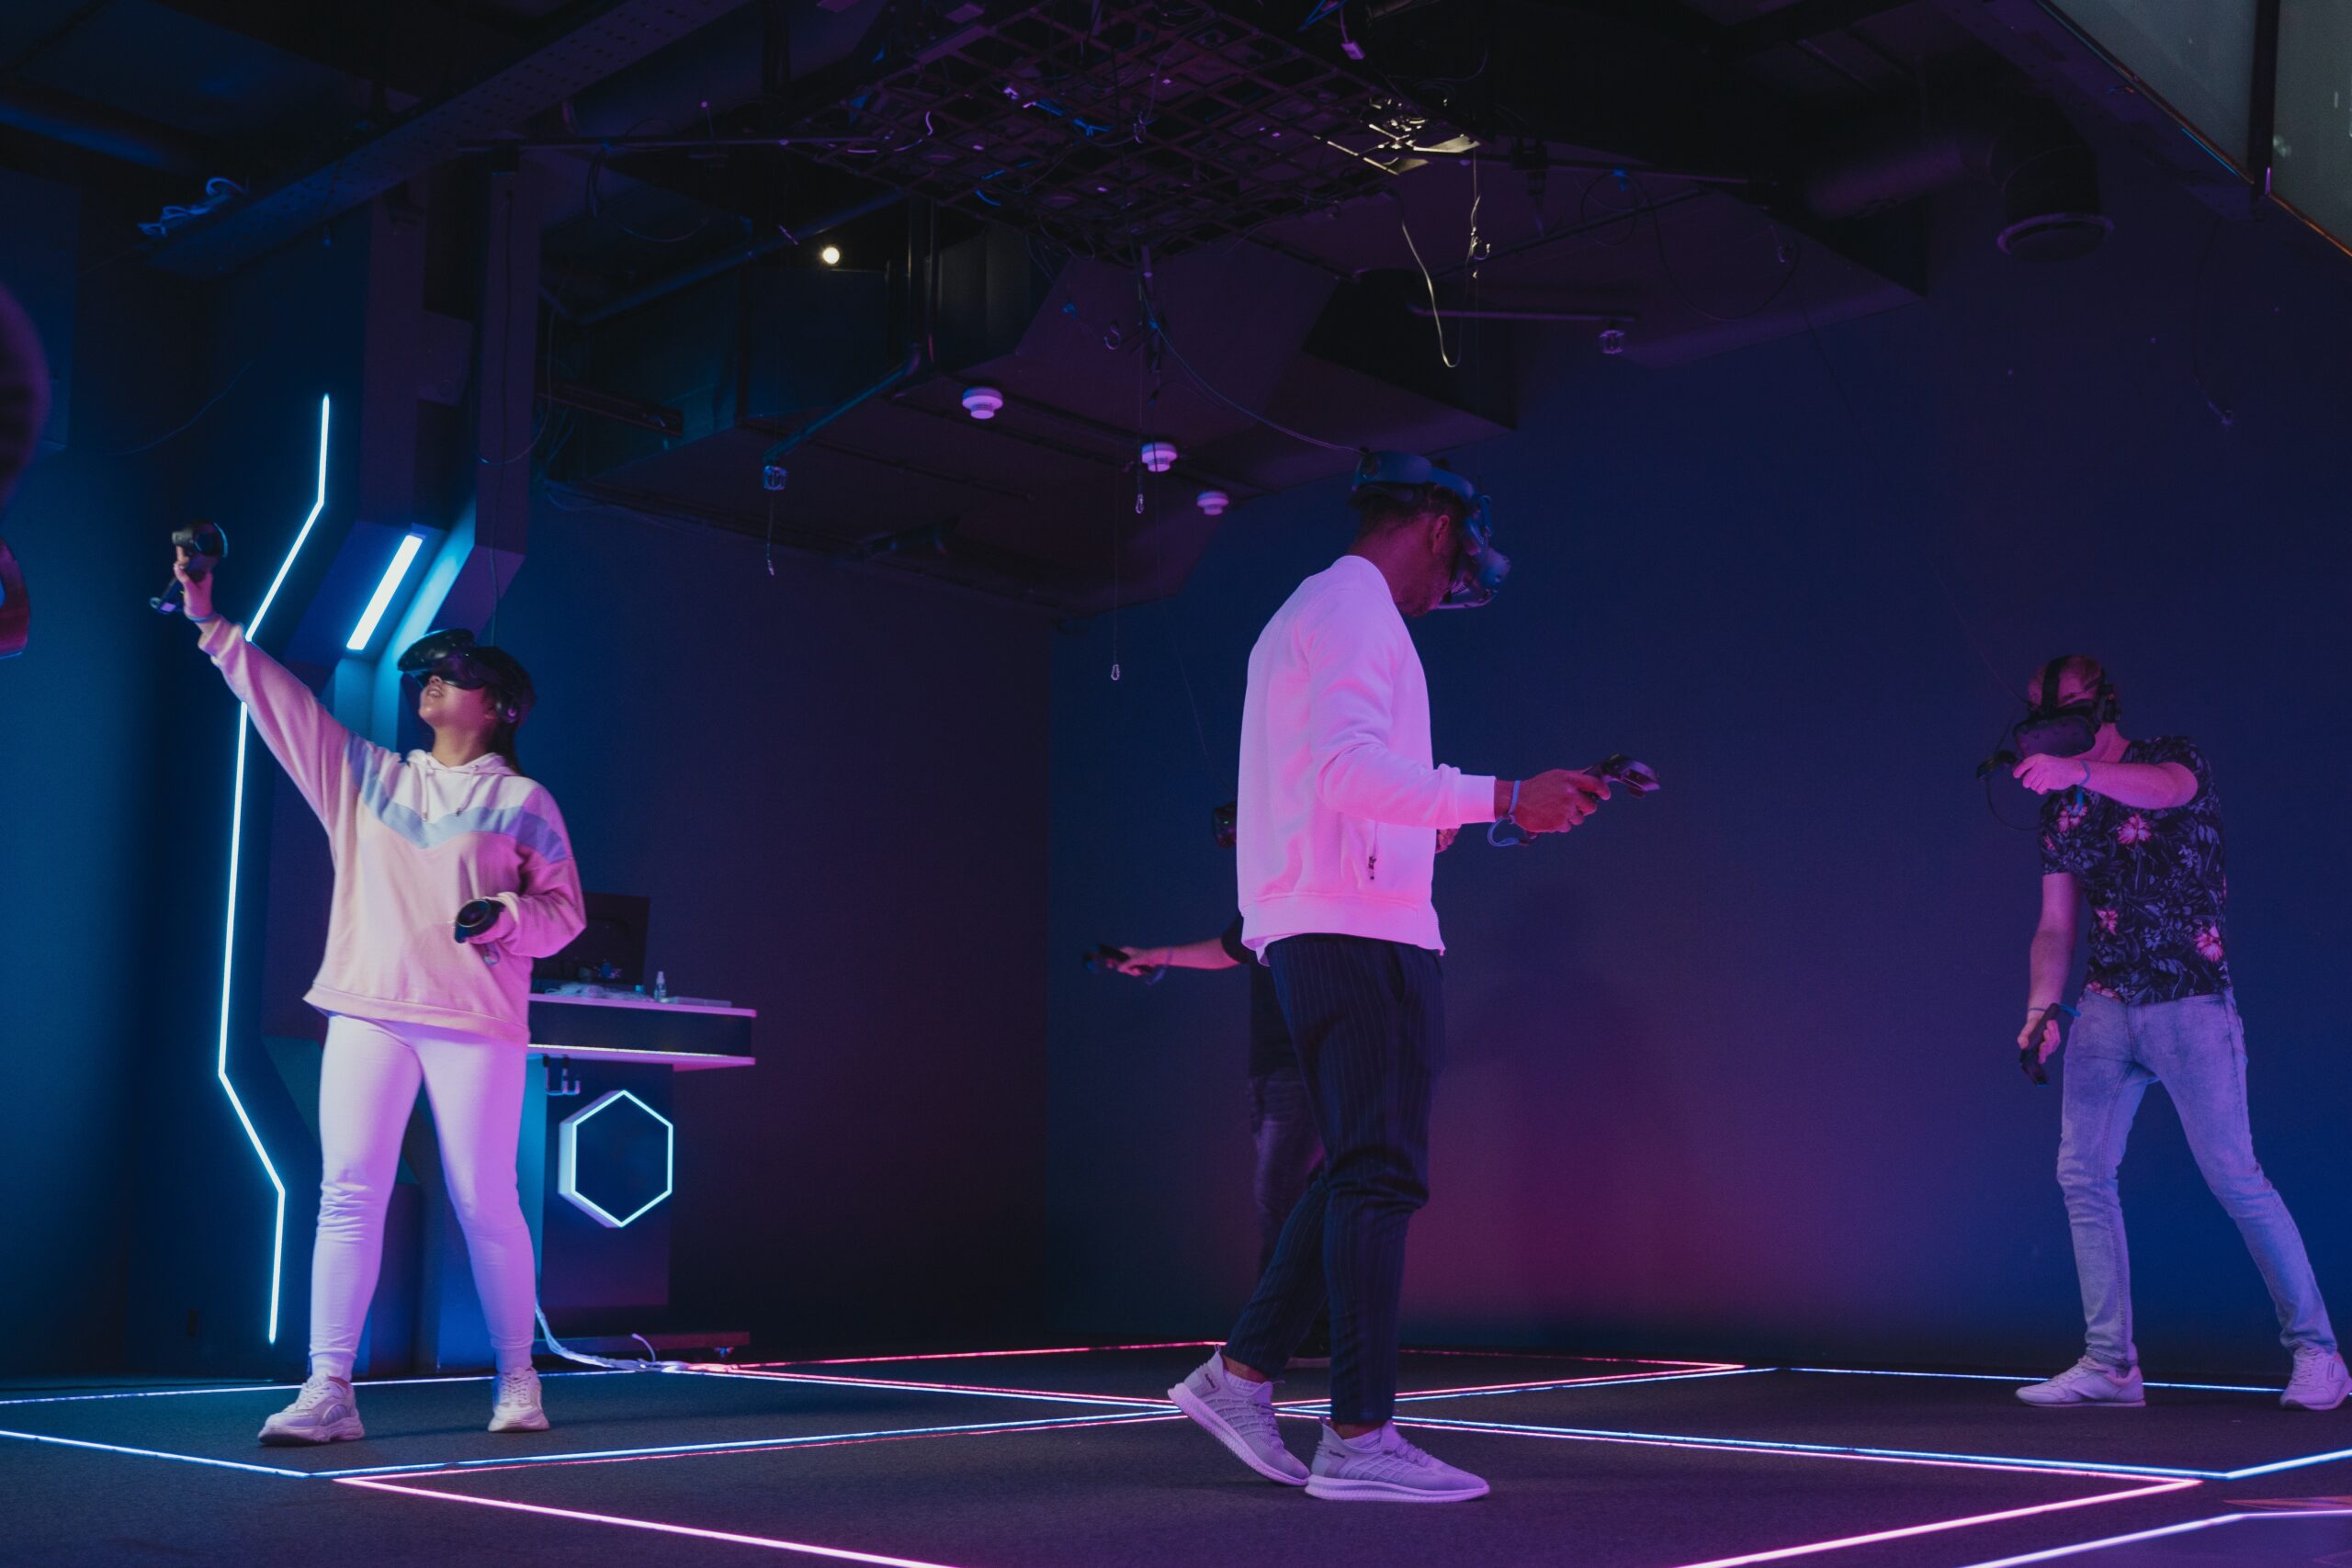 A group of people wearing VR headsets in a studio lit by blue and purple lights